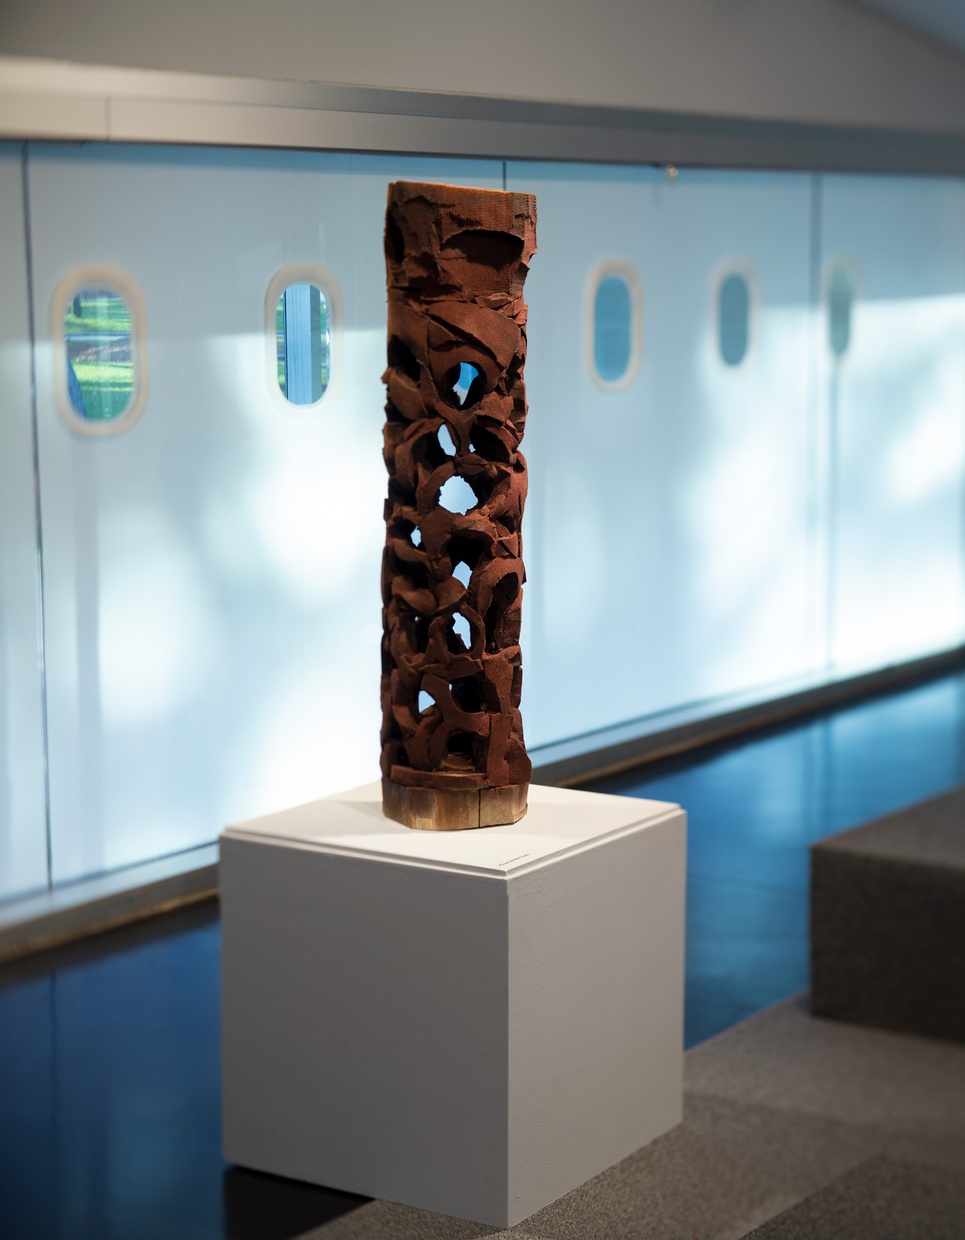 A vertically oriented sculpture on a plinth in a gallery.